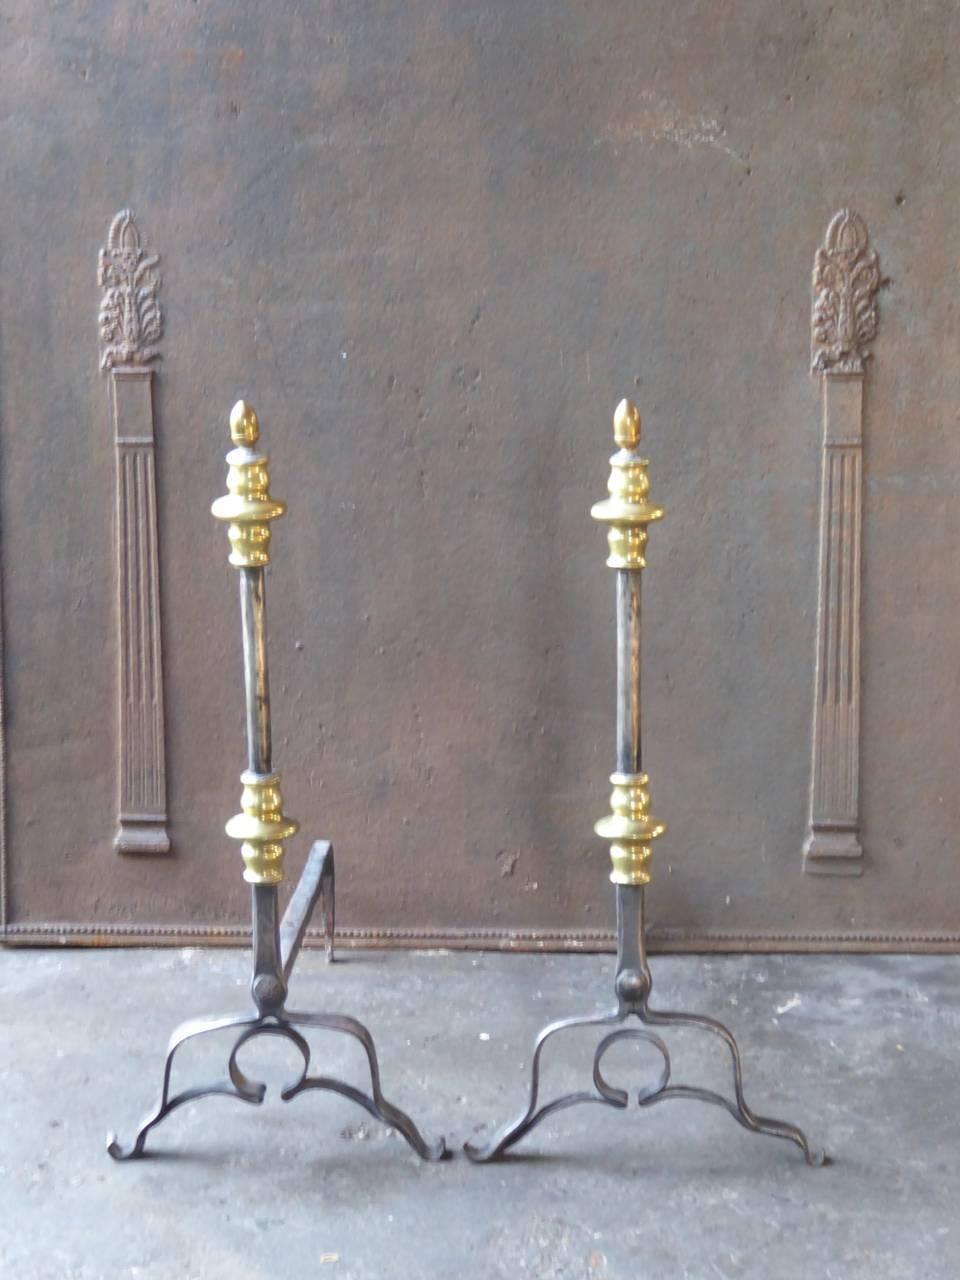 Beautiful 17th century Dutch fire dogs made of wrought iron and polished brass.

We have a unique and specialized collection of antique and used fireplace accessories consisting of more than 1000 listings at 1stdibs. Amongst others, we always have